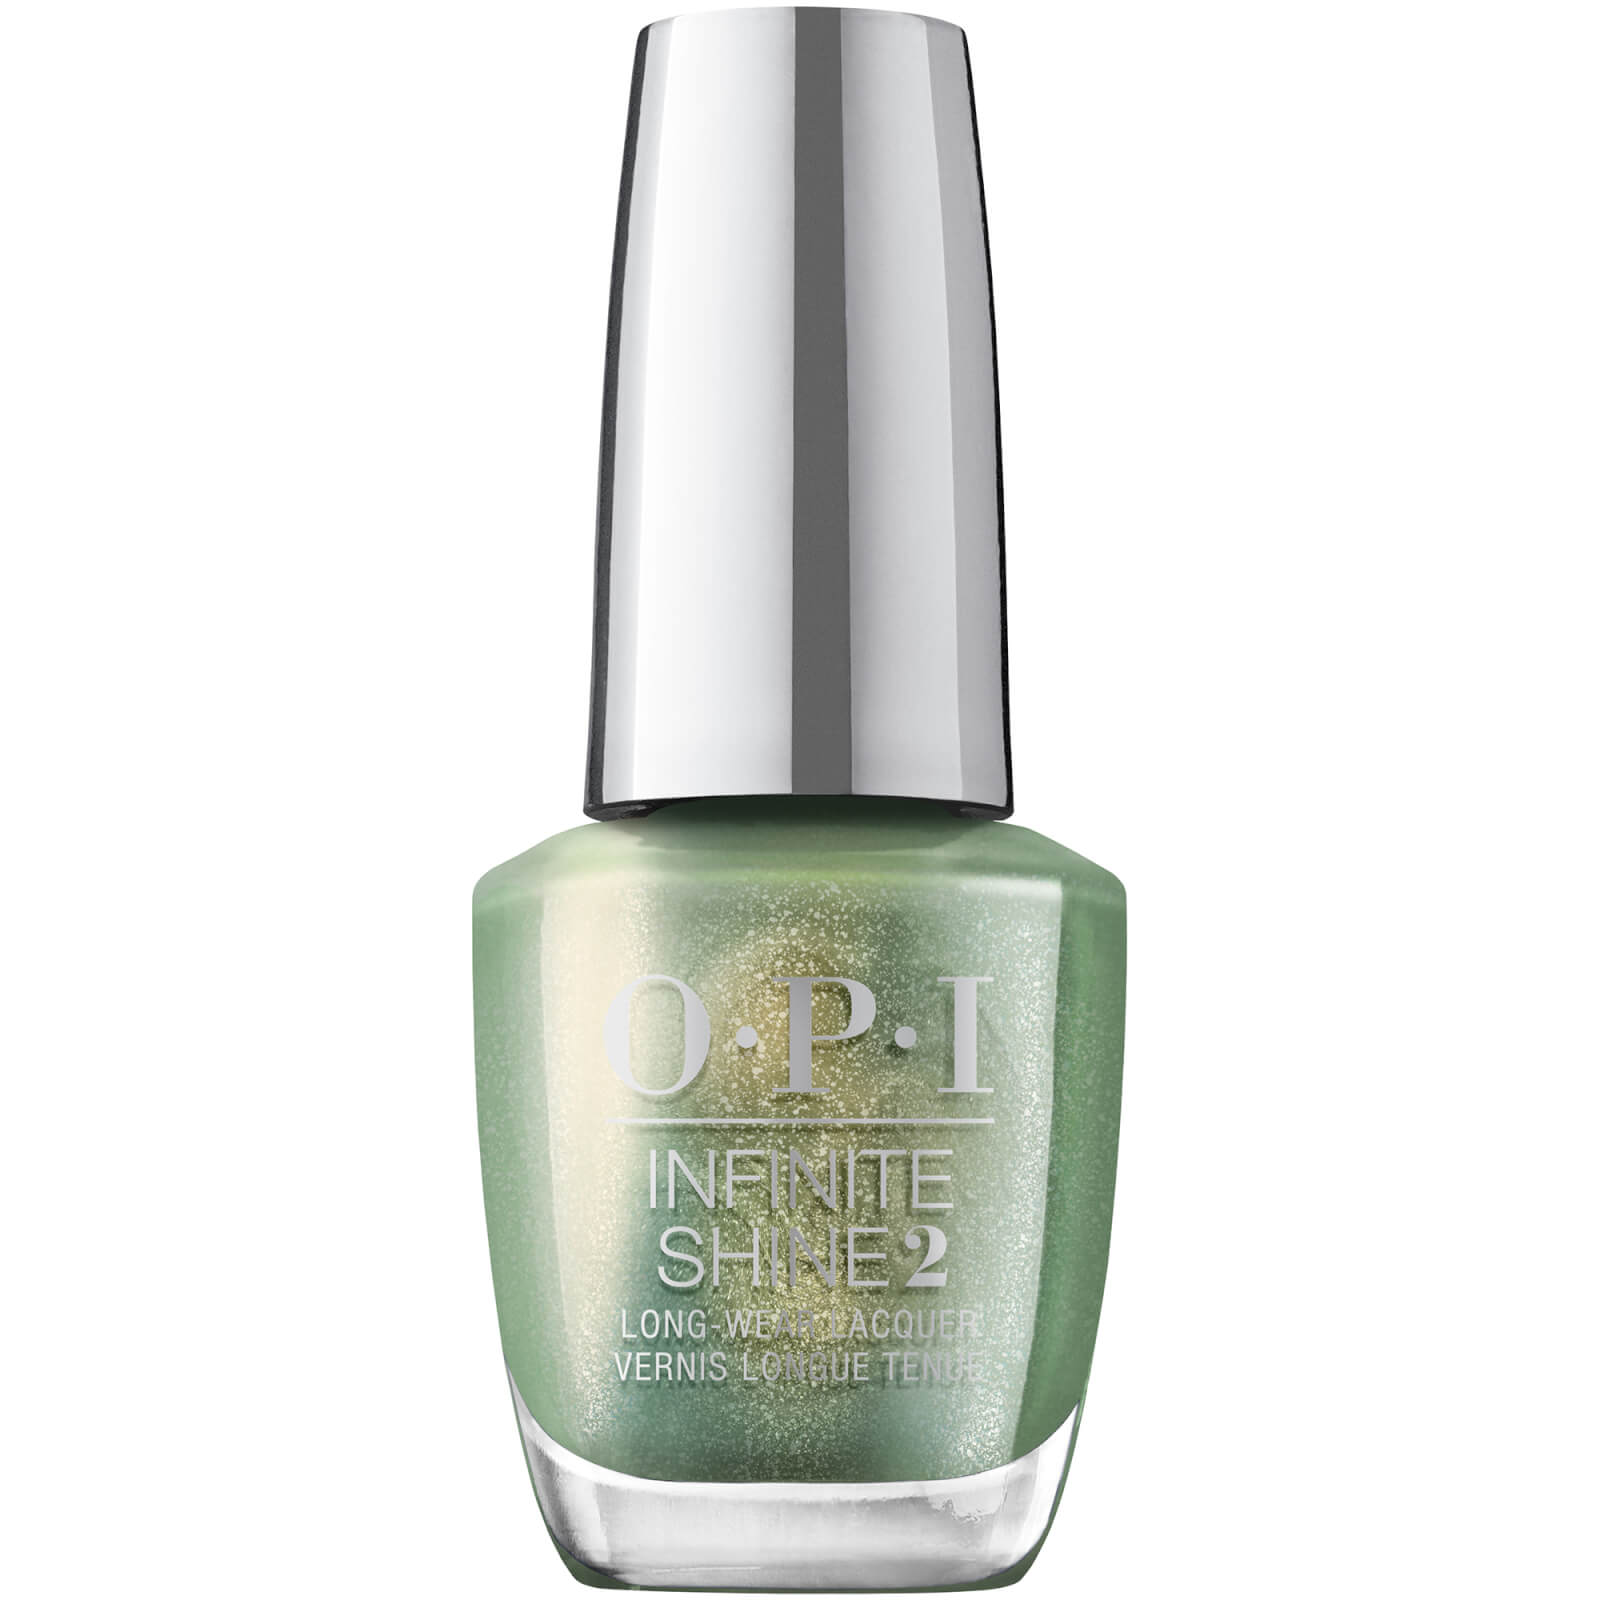 Opi Jewel Be Bold Collection Infinite Shine Nail Polish 15ml (various Shades) - Decked To The Pines